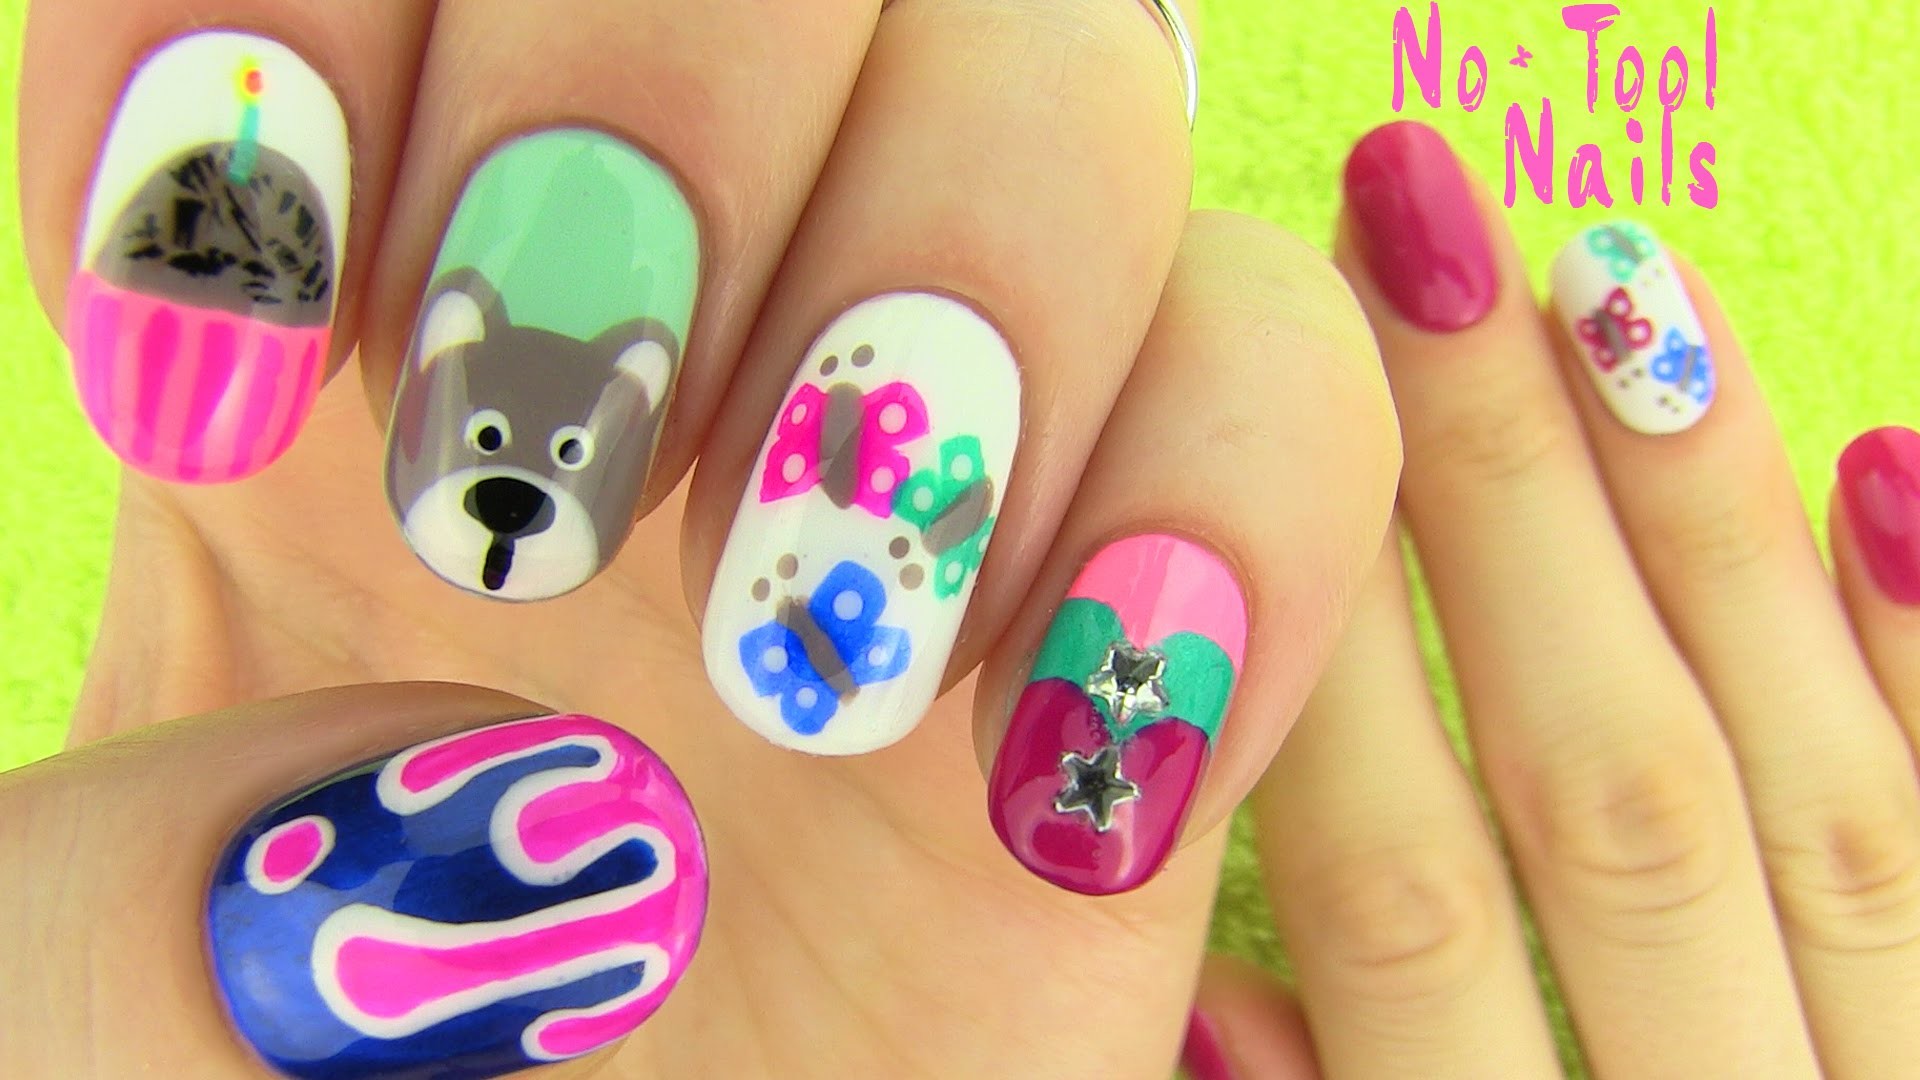 1. Latest Nail Art HD Picture Gallery - wide 1